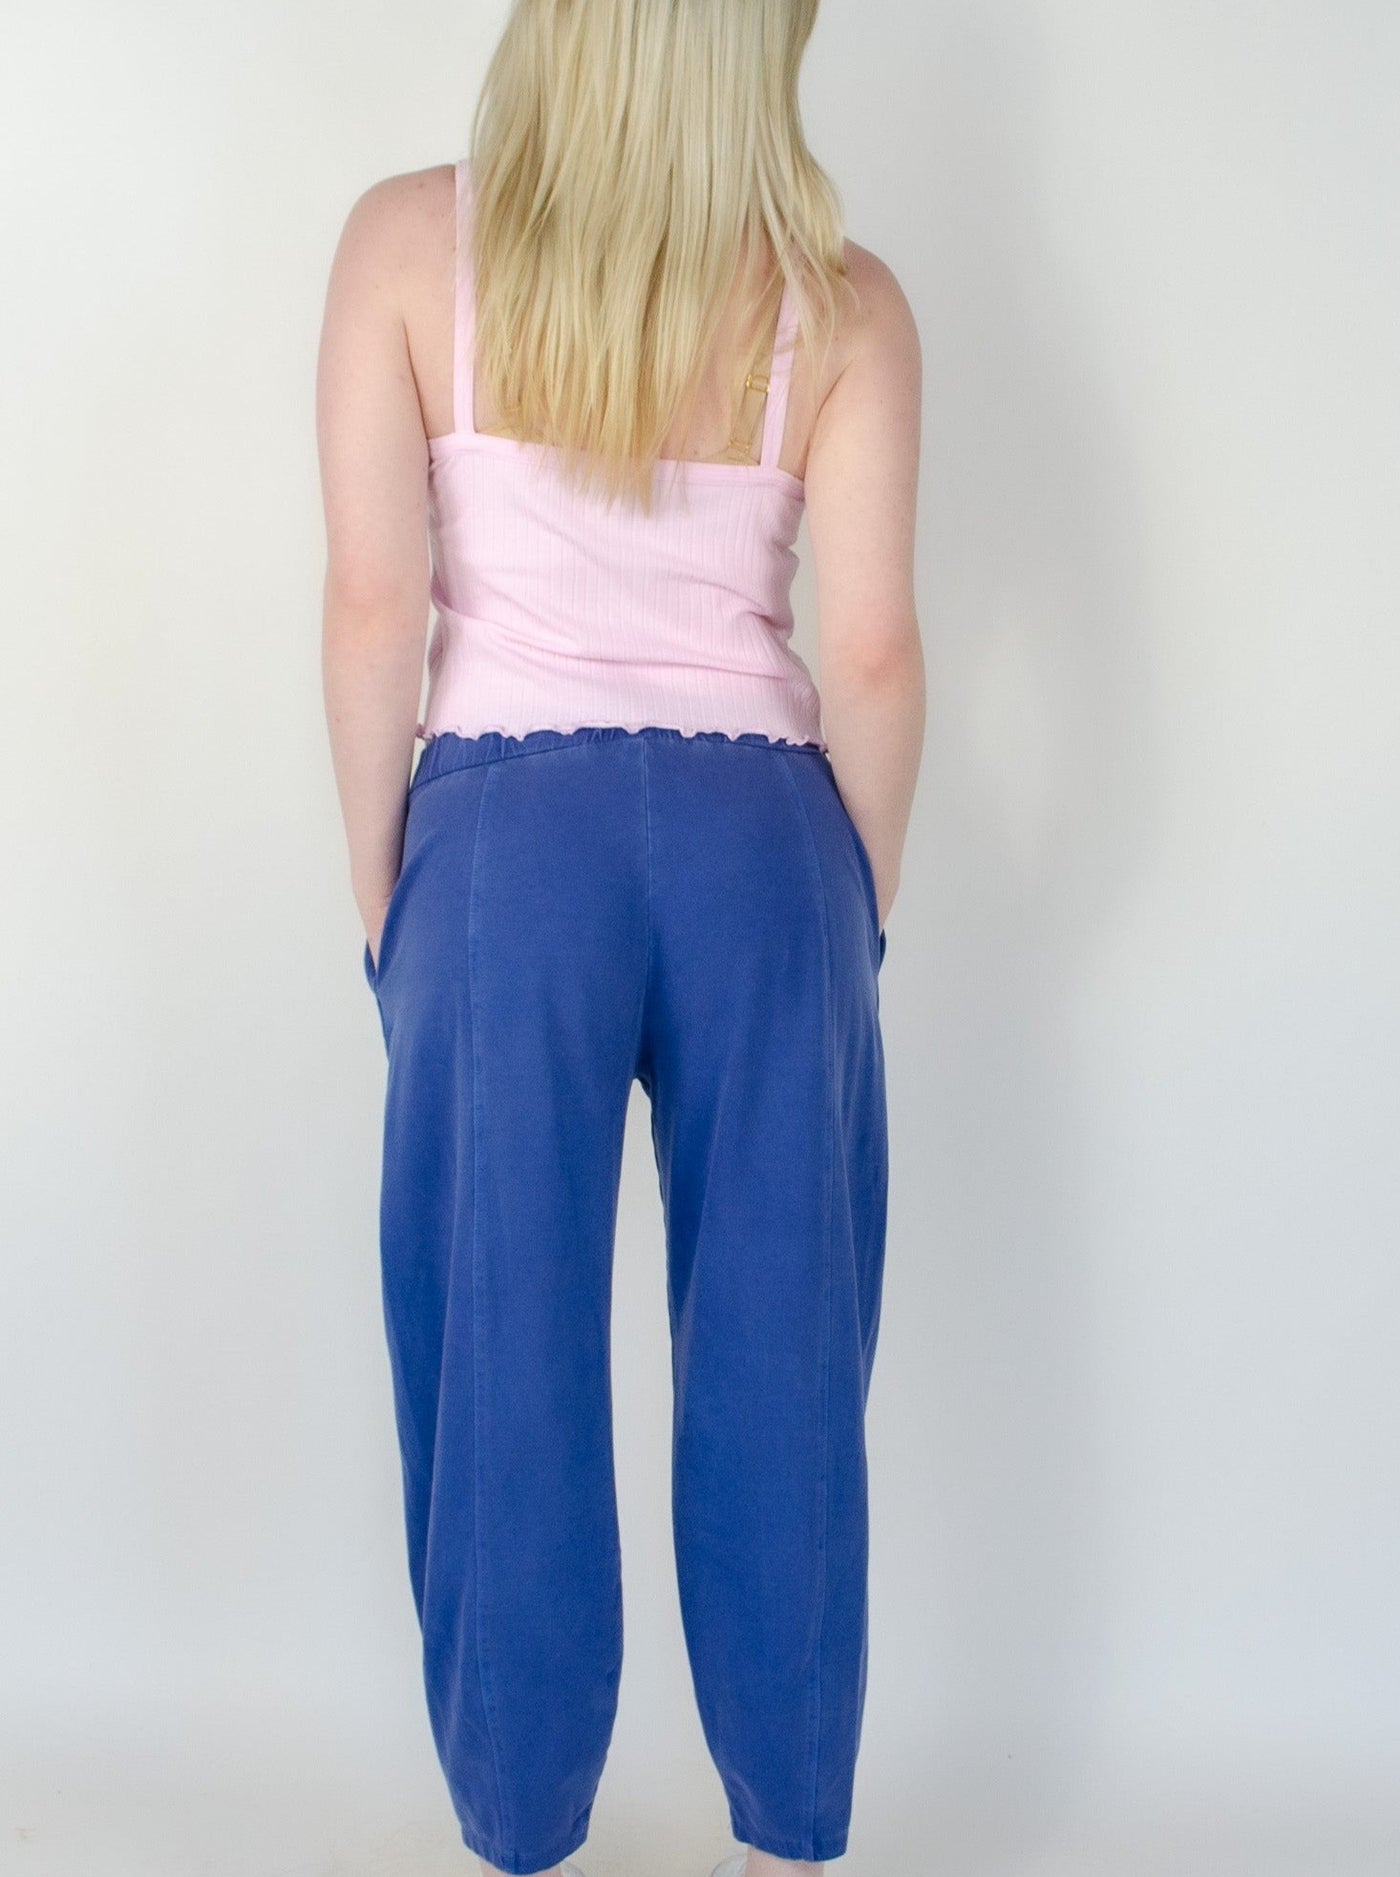 Model is wearing a low rise blue pull on sweat pant with a pink tank top